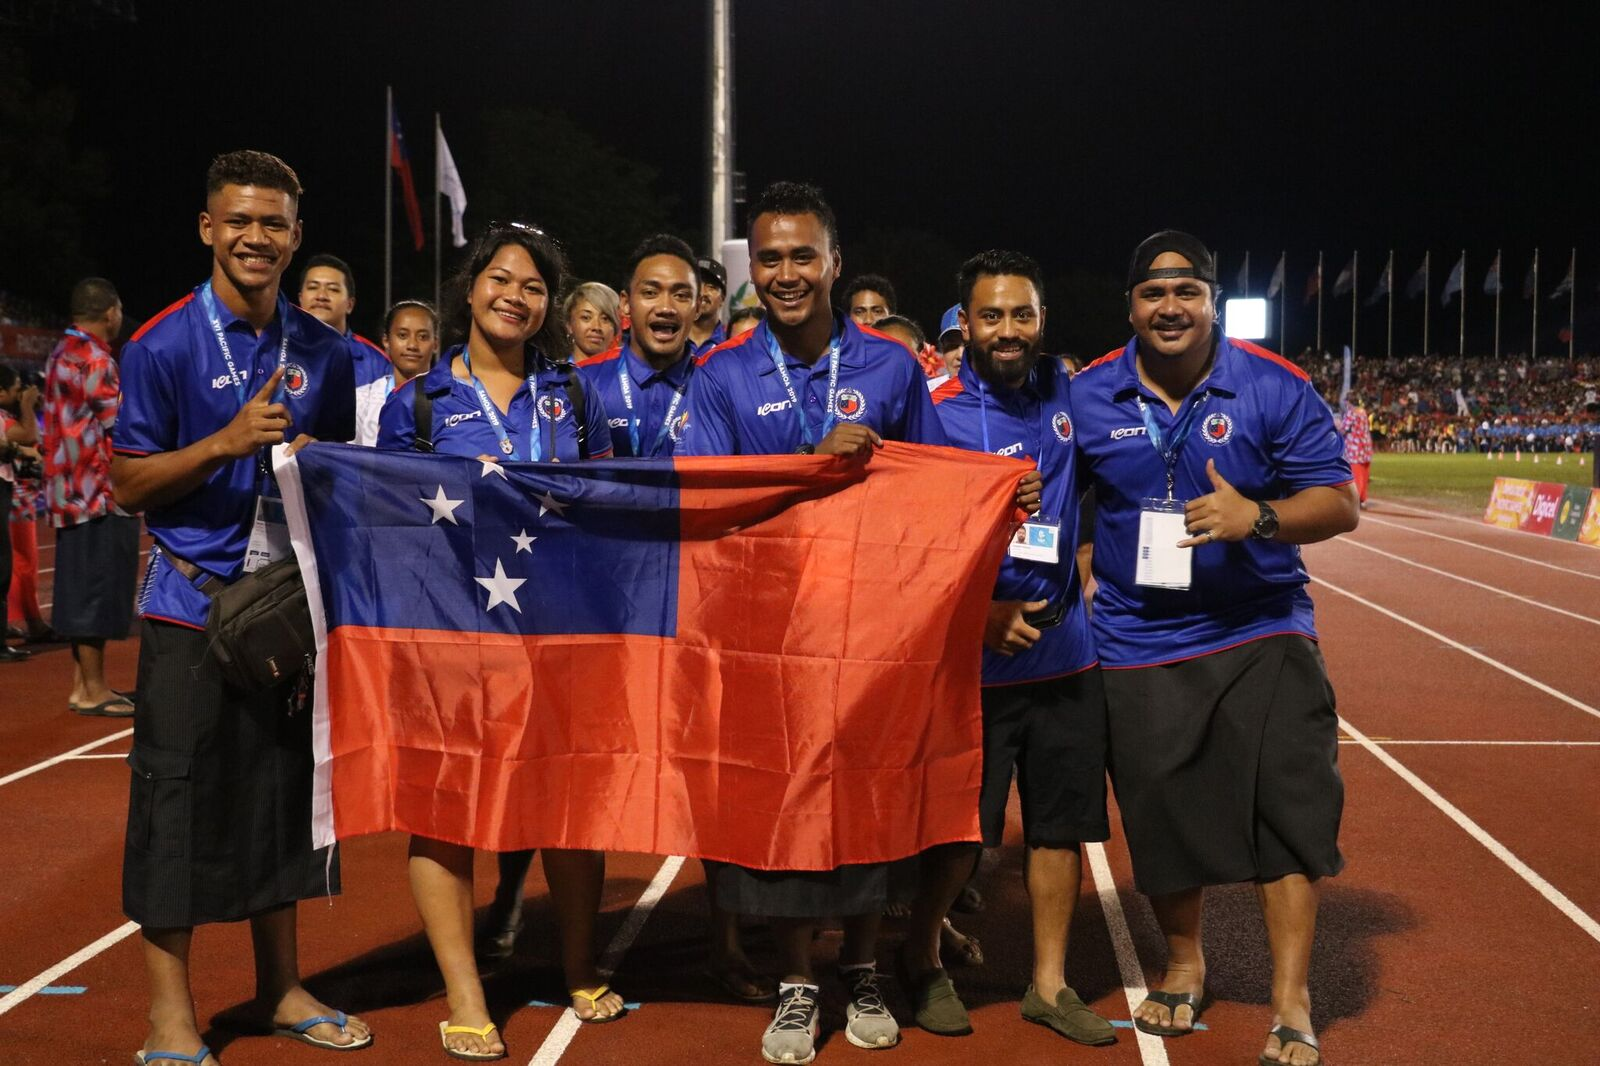 Samoa 2019 Closing Ceremony held after sporting action ends